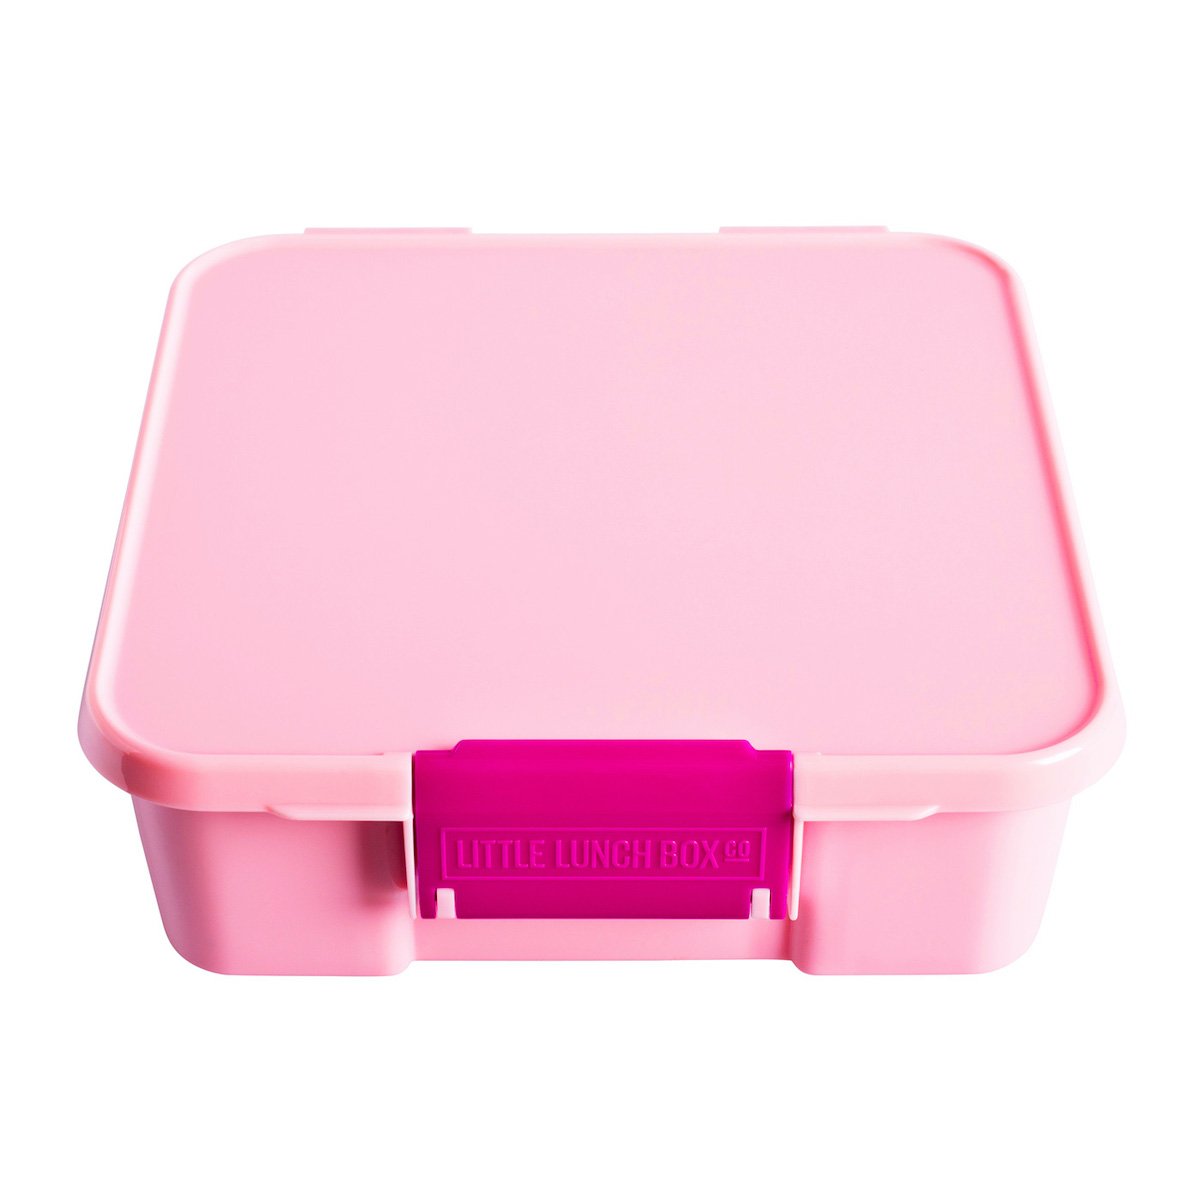 Little Lunch Box Co. Bento Five: Pink Bento Box by Little Lunch Box Co. | Cute Kid Stuff